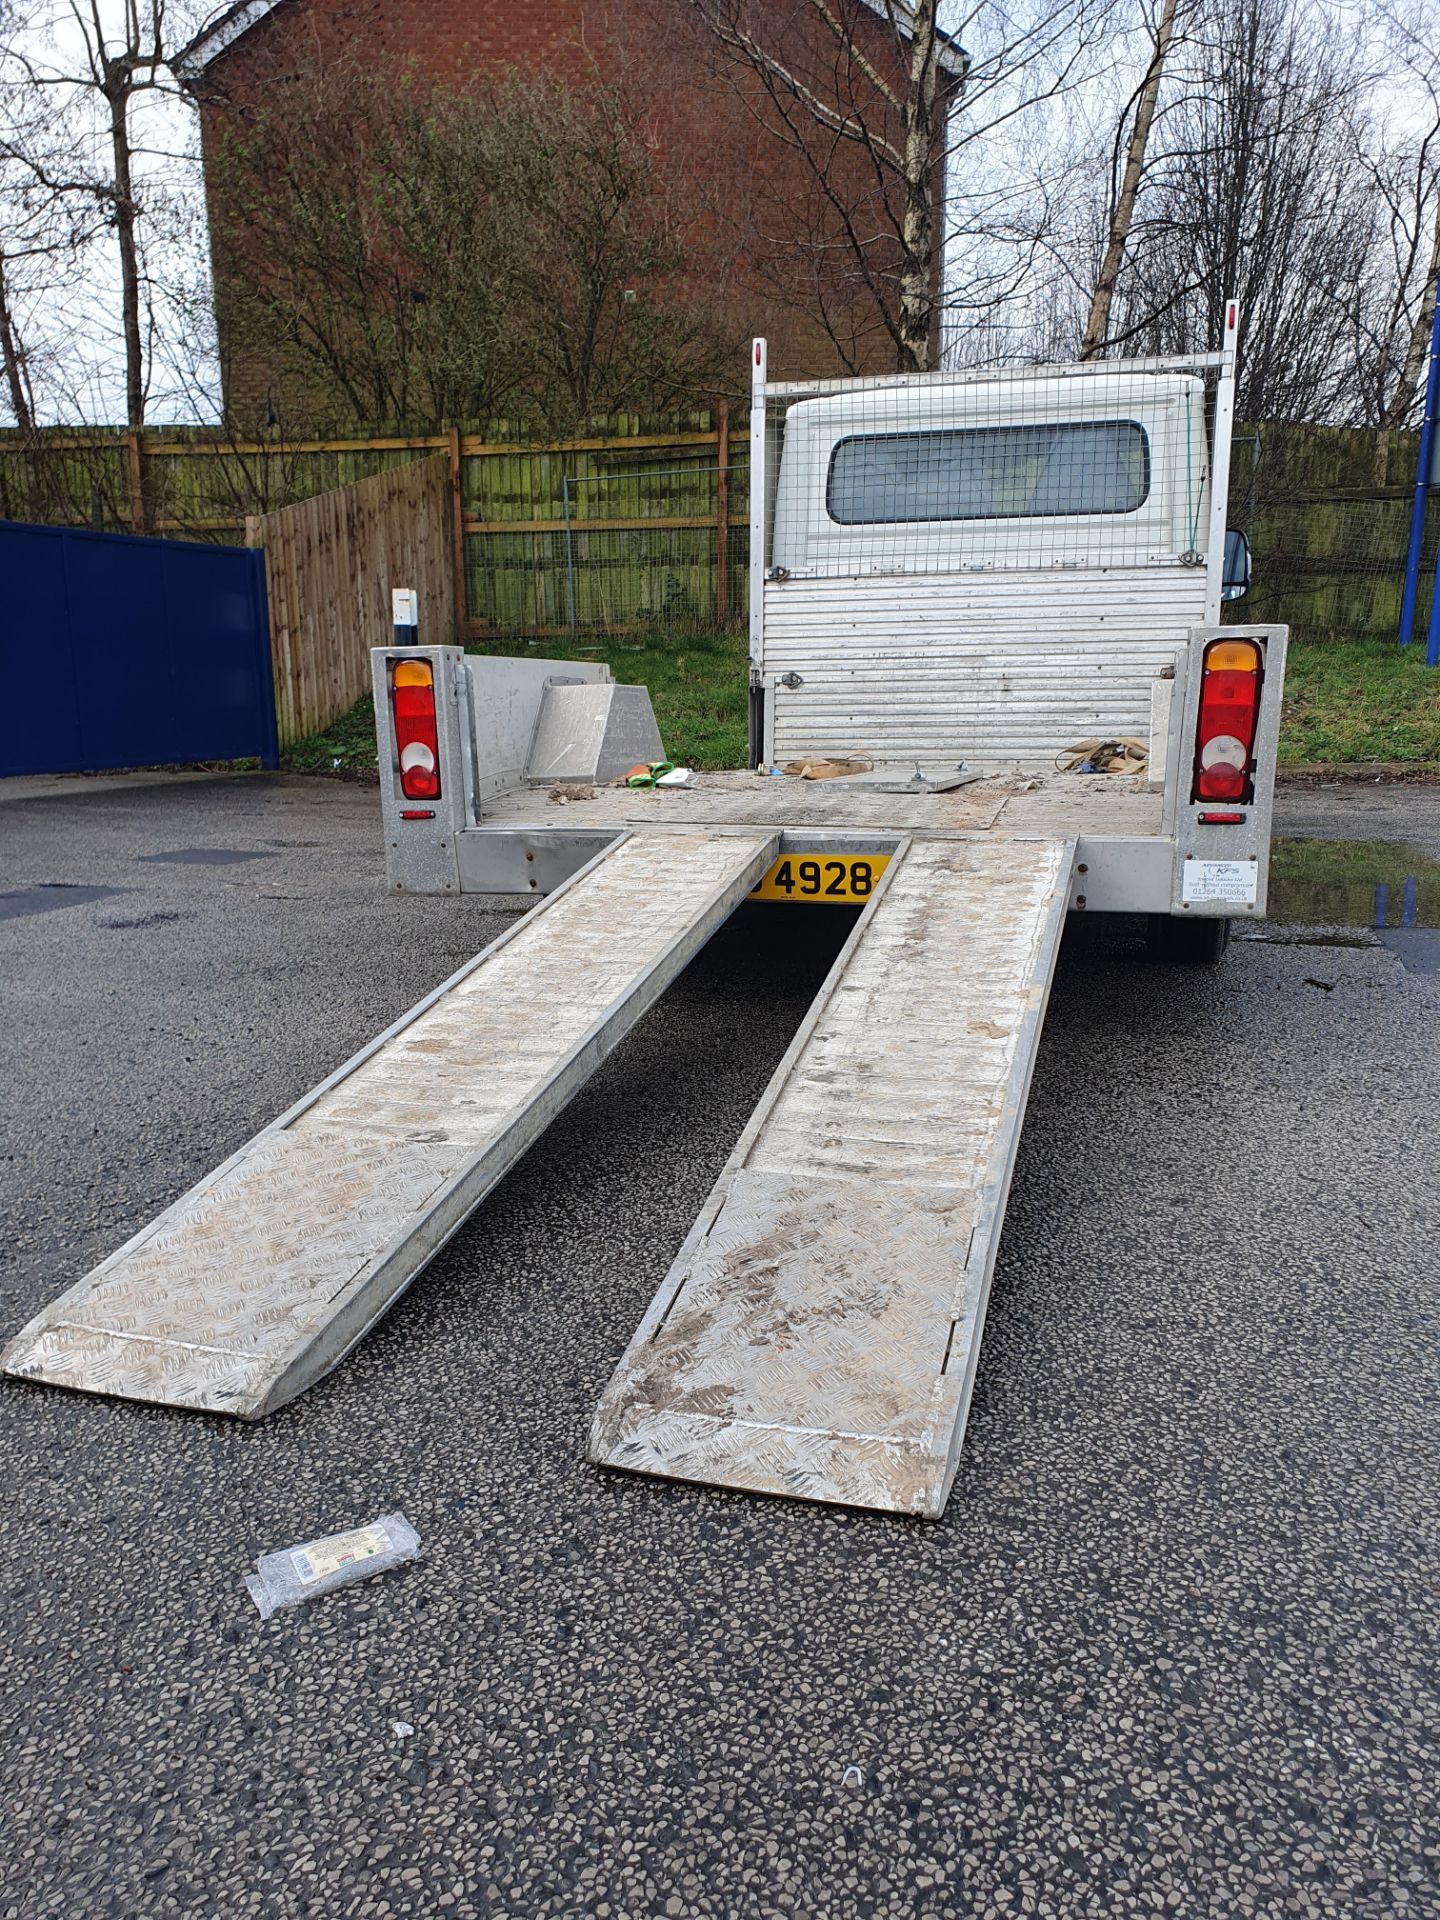 Citroen Relay X2-50 Flat Lorry w/ Loading Ramp Sides | DIG 4928 | 148,060 Miles - Image 12 of 20